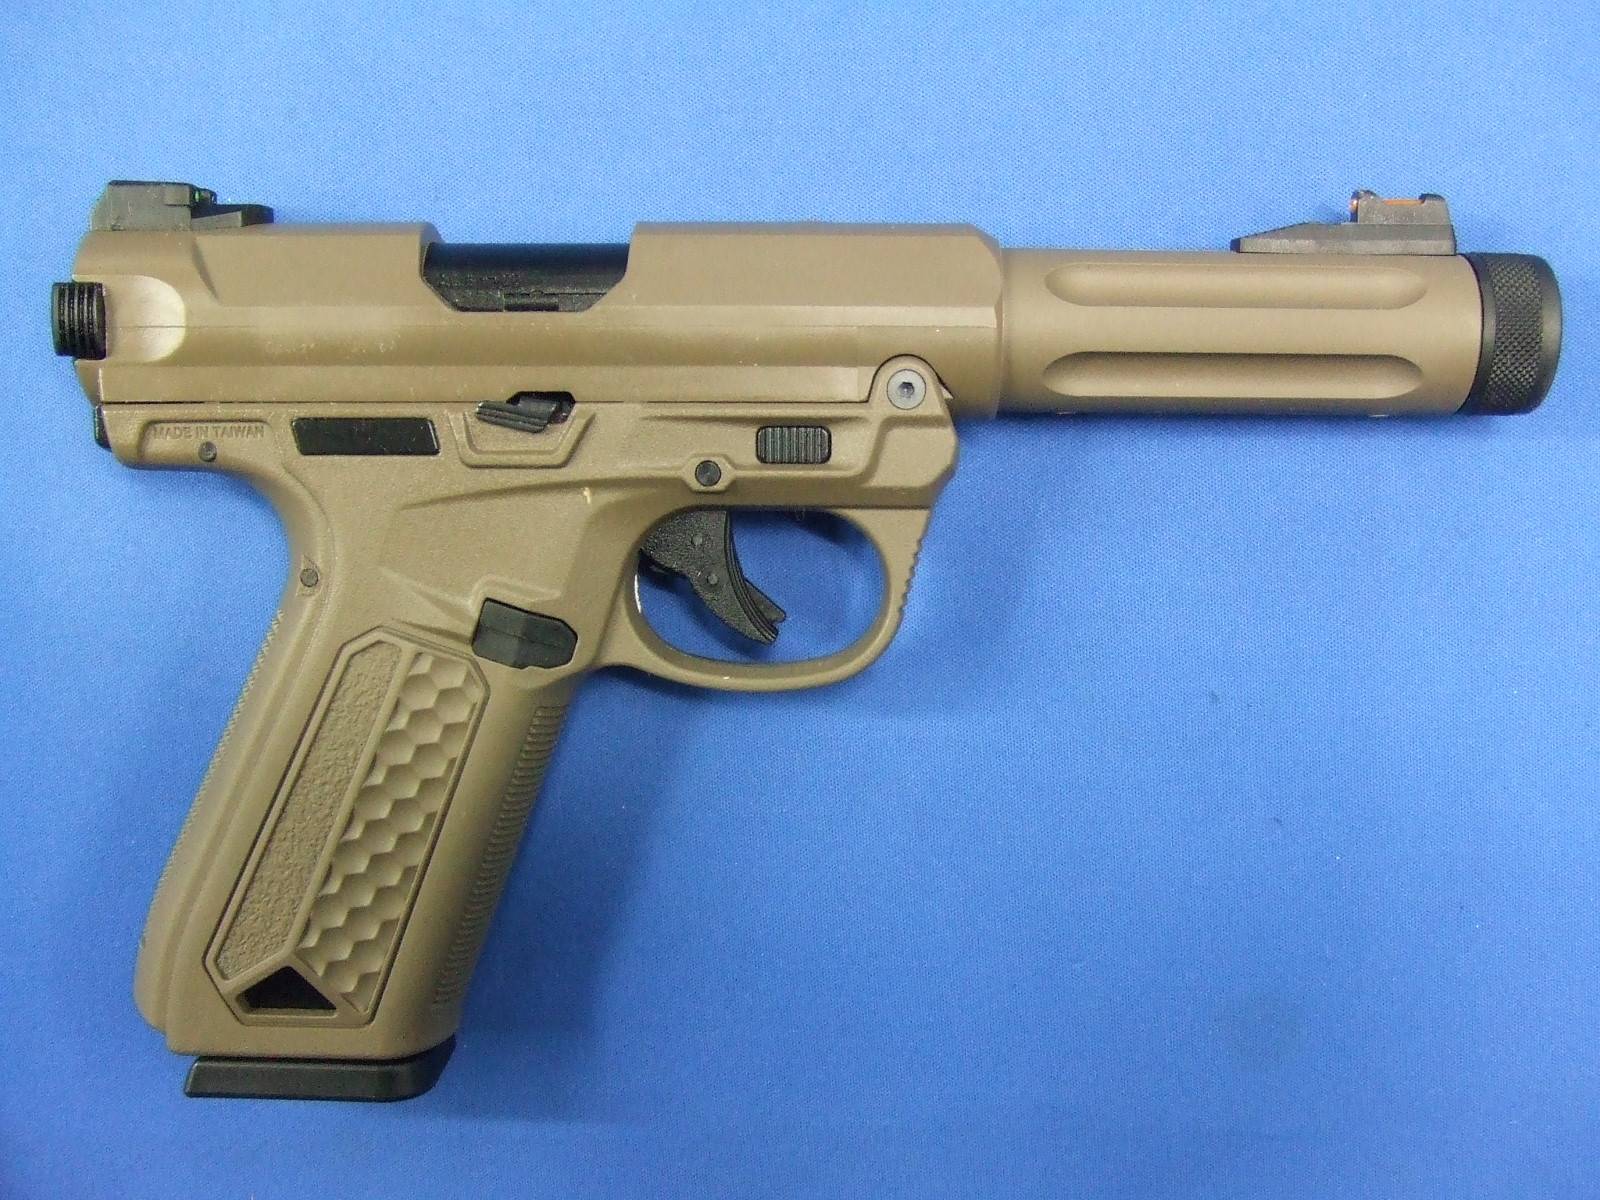 AAP-01 ASSASSIN FDE   |   Action Army